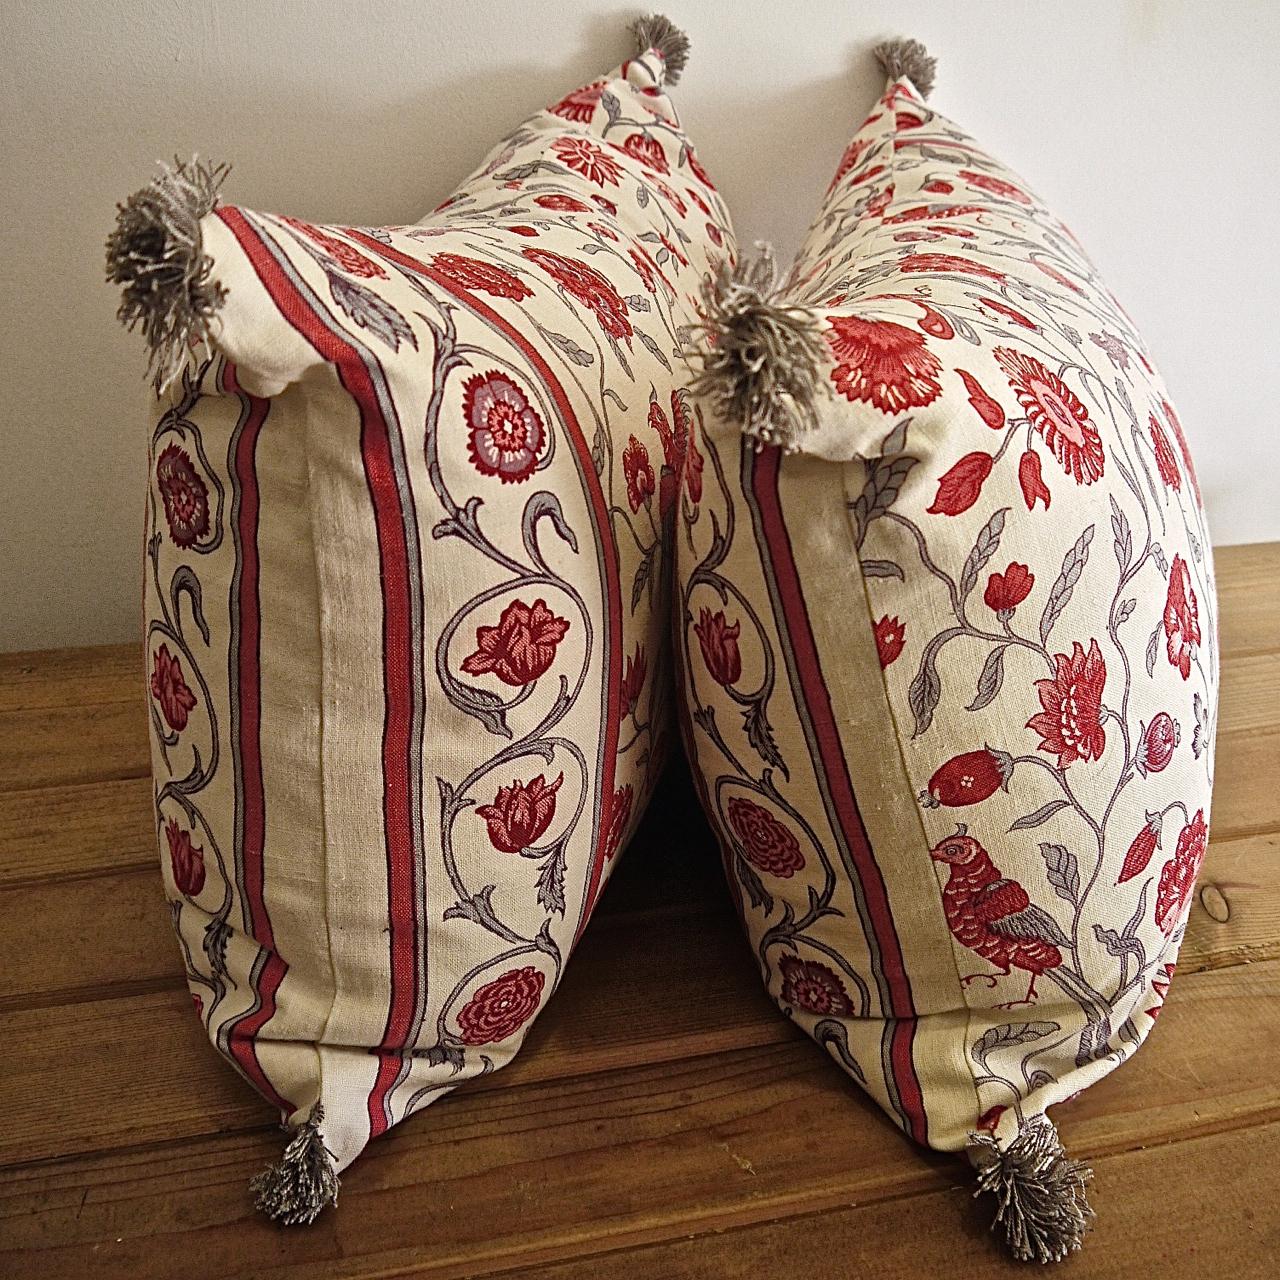 Pair of Red and Grey Birds and Flowers Linen Pillows, French, Early 20th Century 5